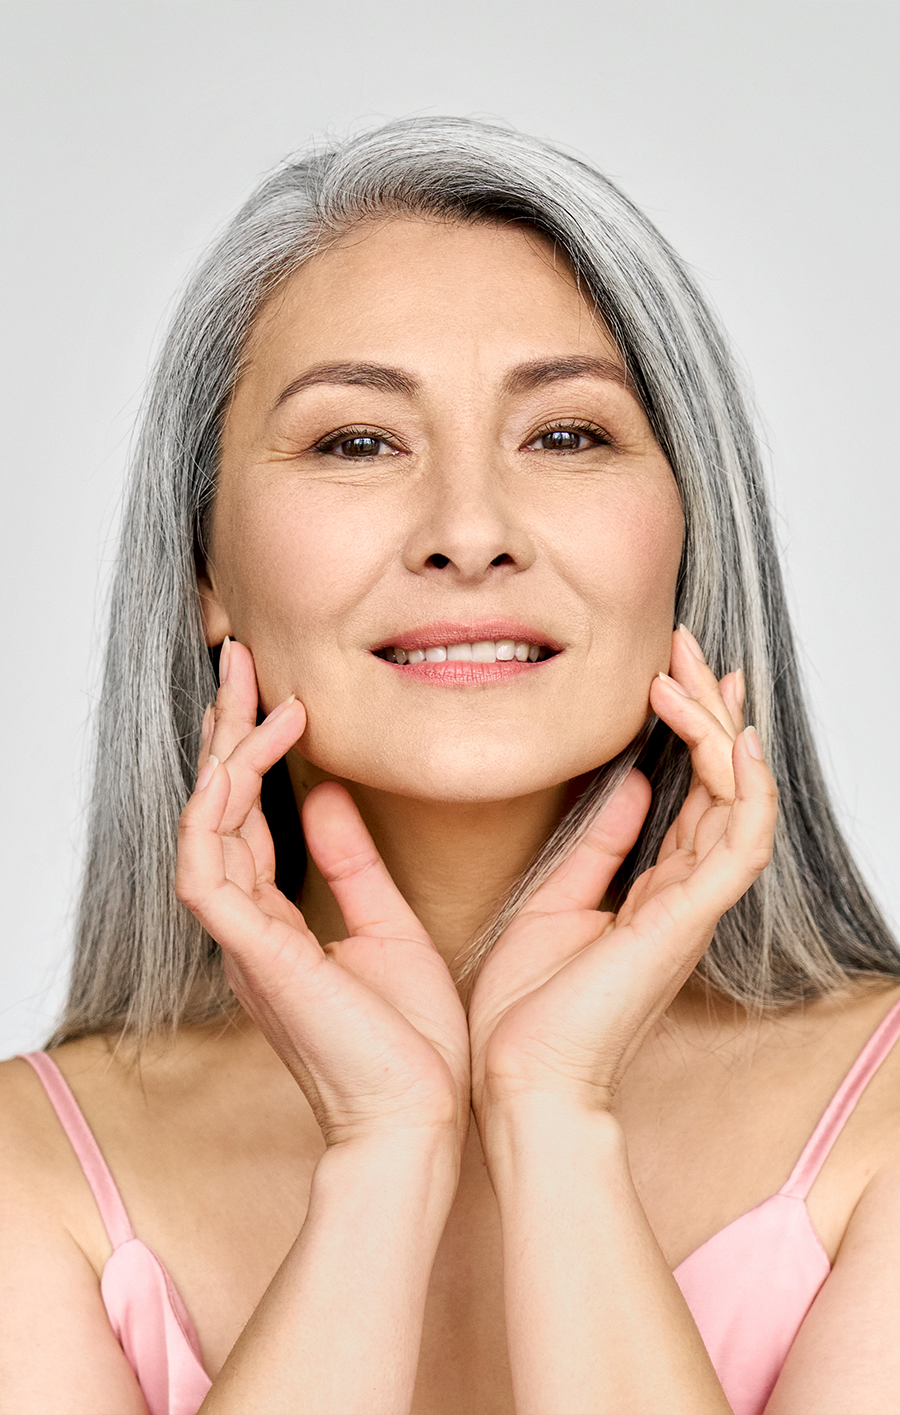 How Skin Changes as We Age